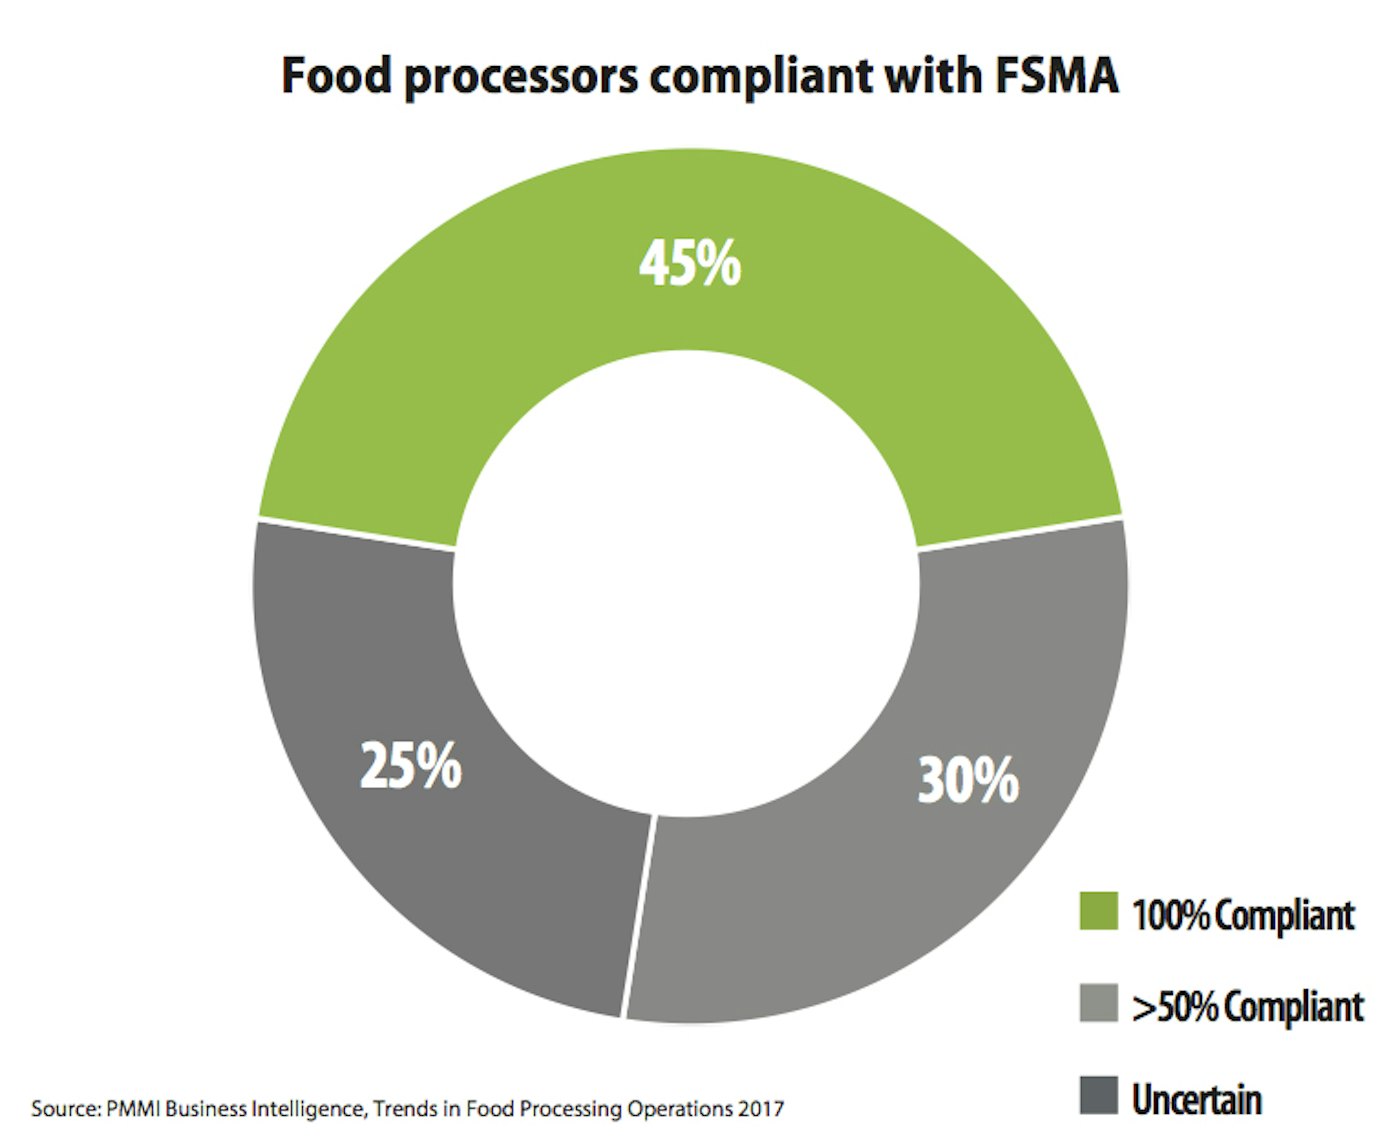 Two out of three food processors are completely or partially compliant